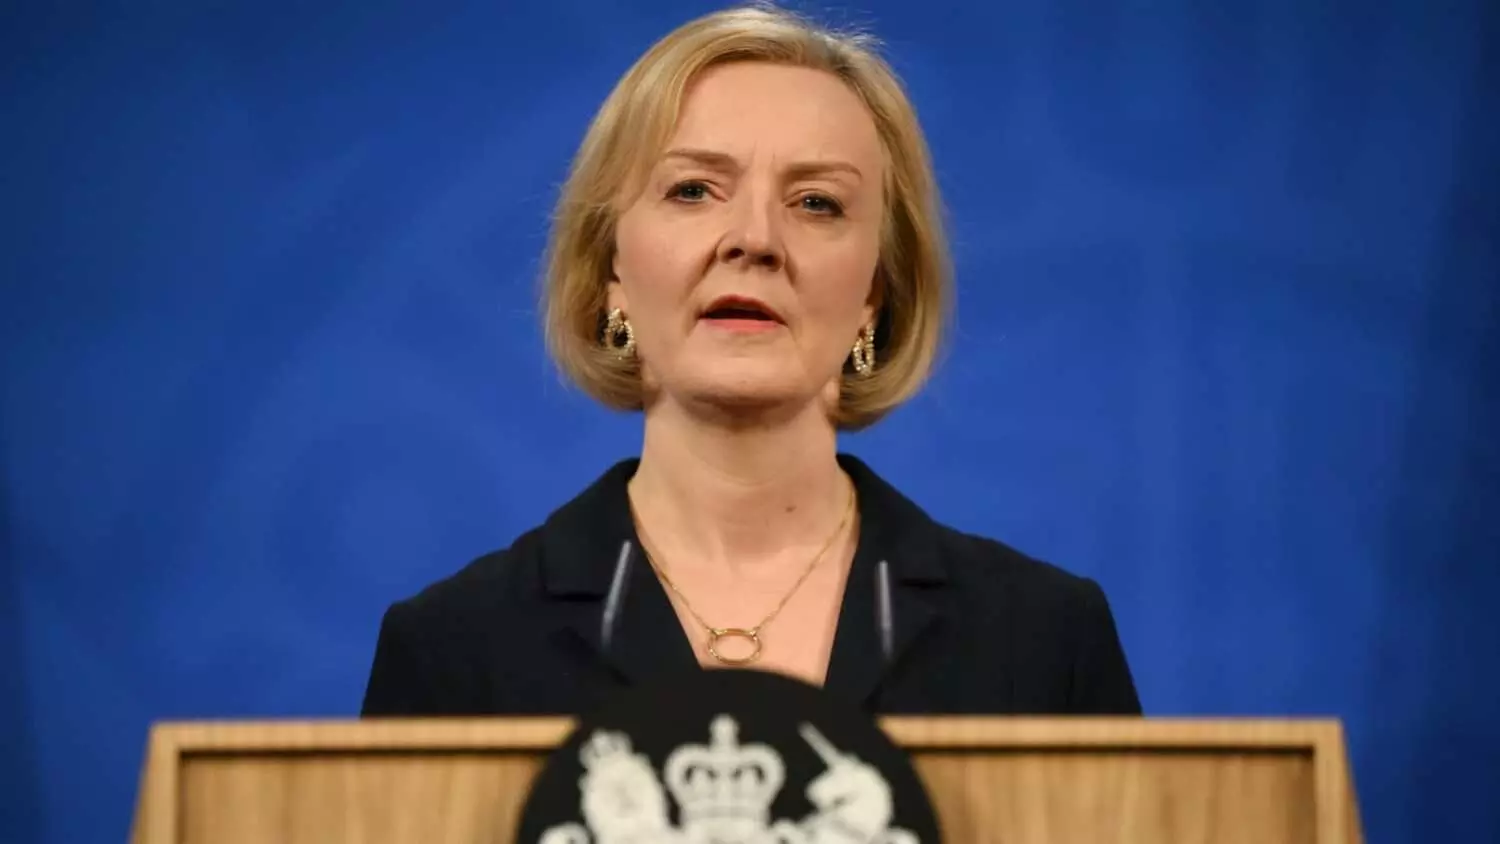 uk pm liz truss faces serious pressure for his policies demand for resignation